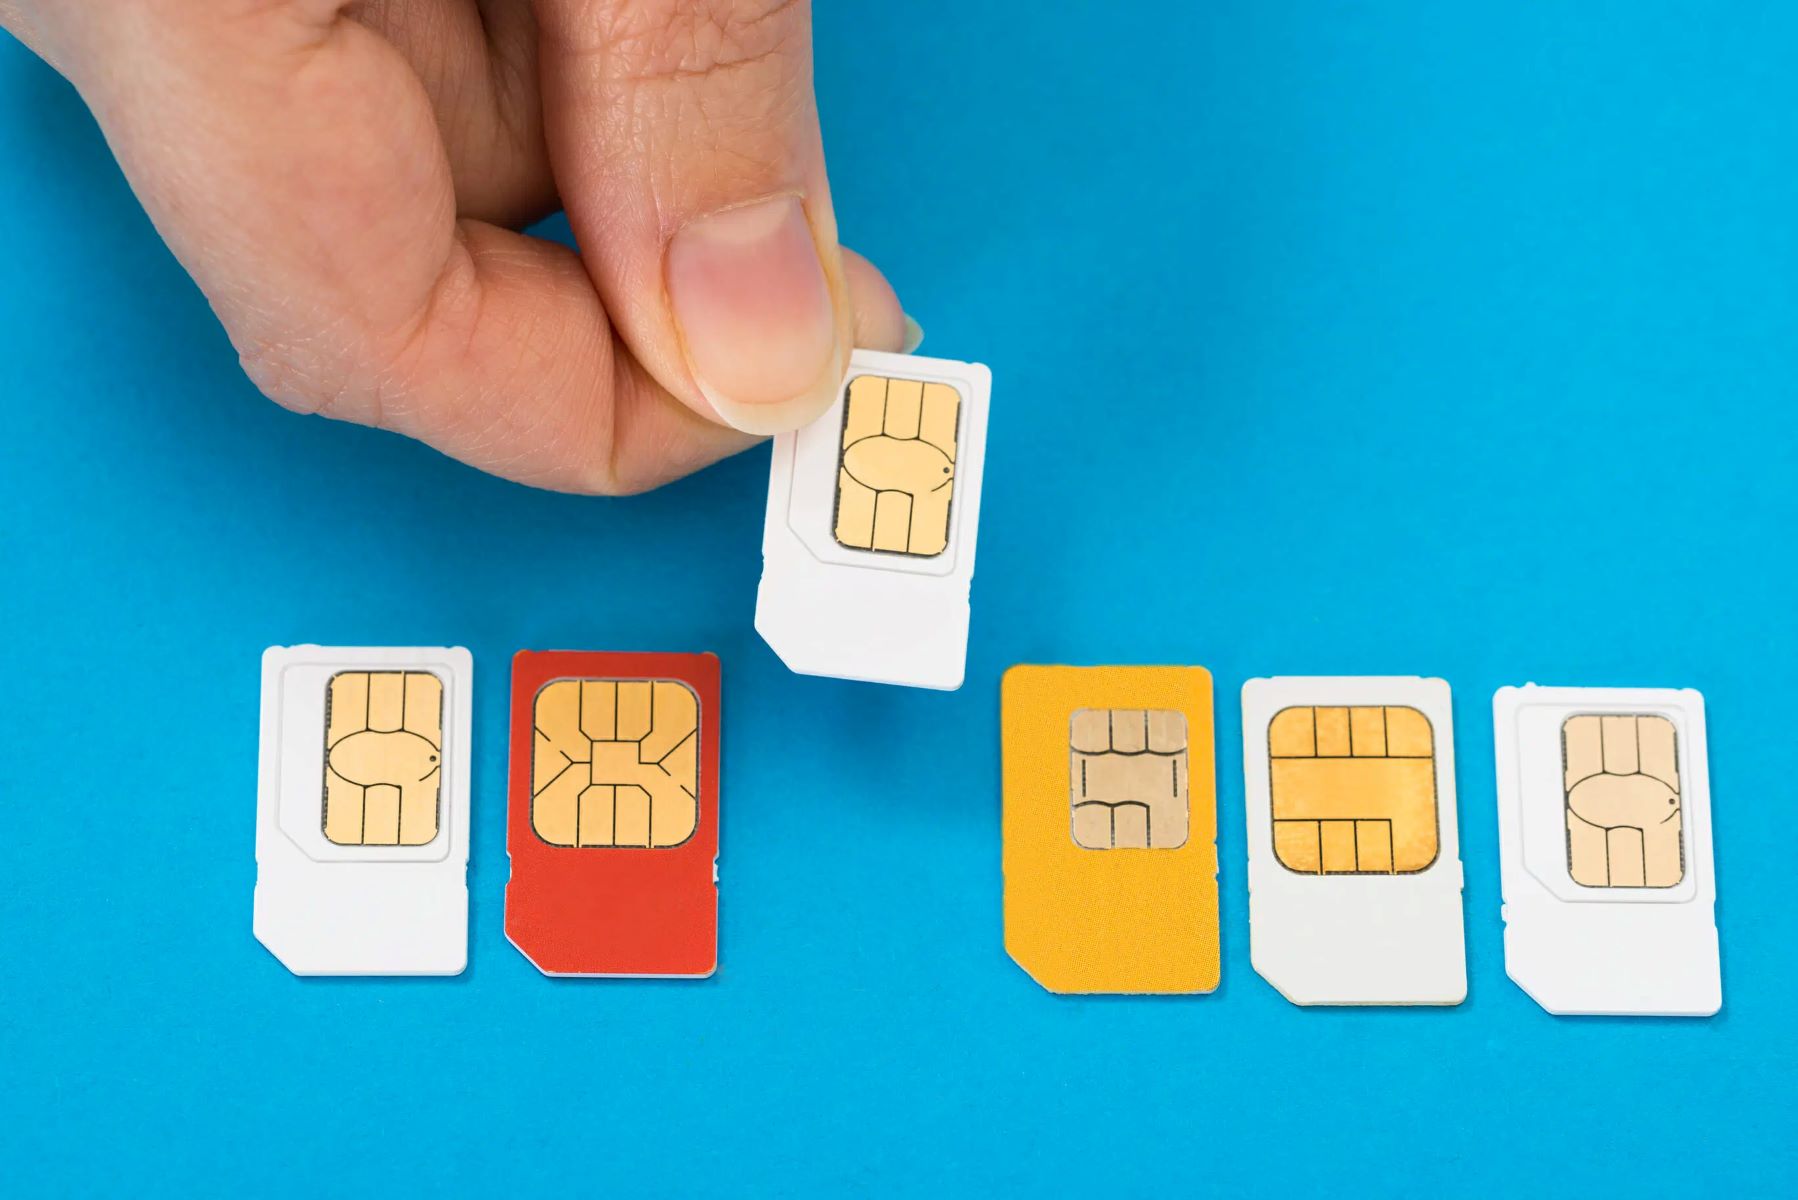 obtaining-a-new-sim-card-a-step-by-step-guide